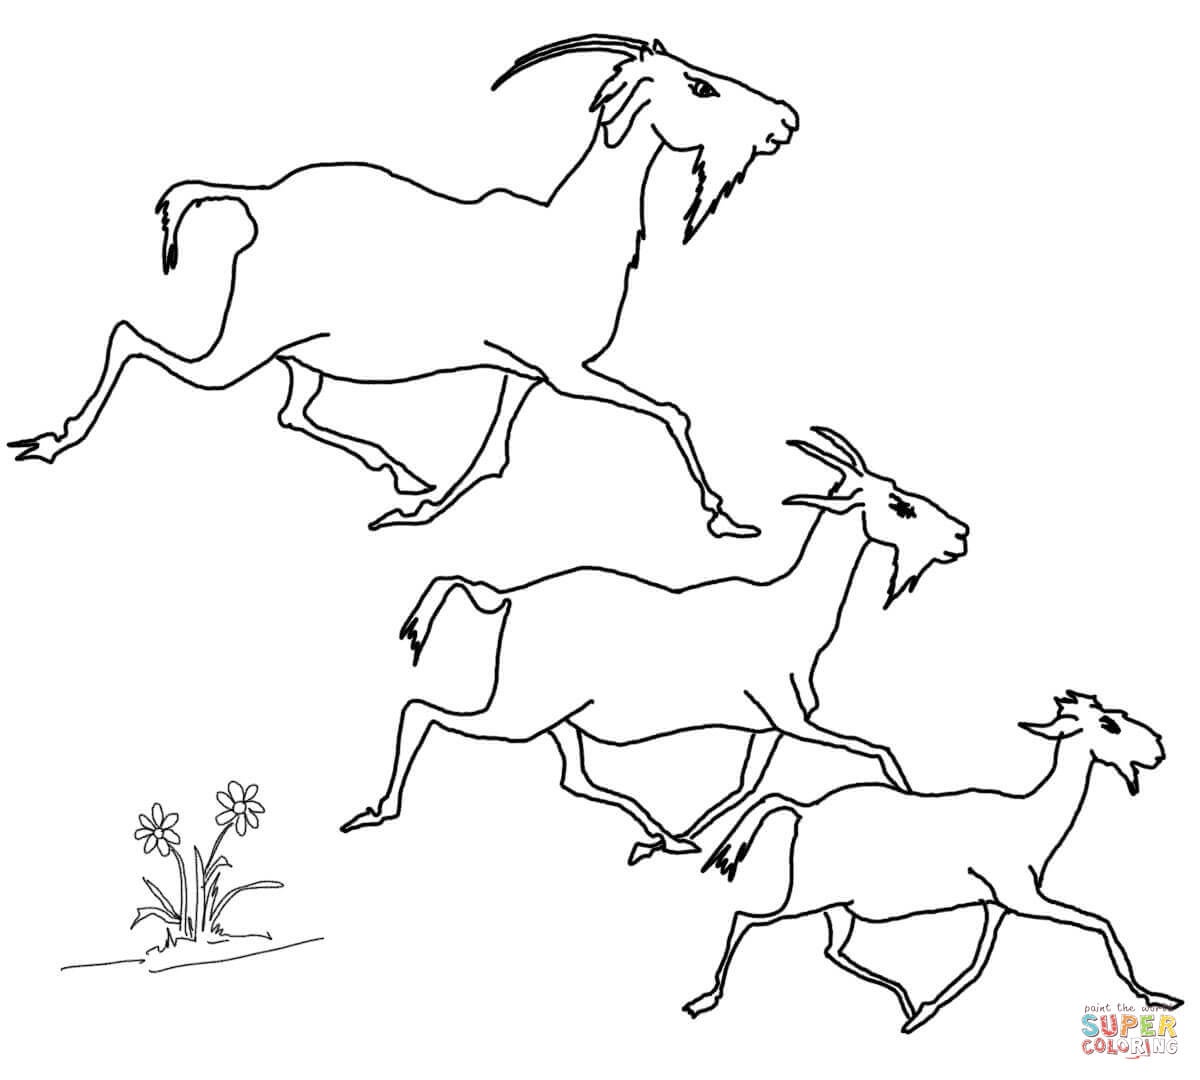 Billy Goats Gruff Coloring Page Lovely Free Printable Colour In Role Three Billy Goats Gruff